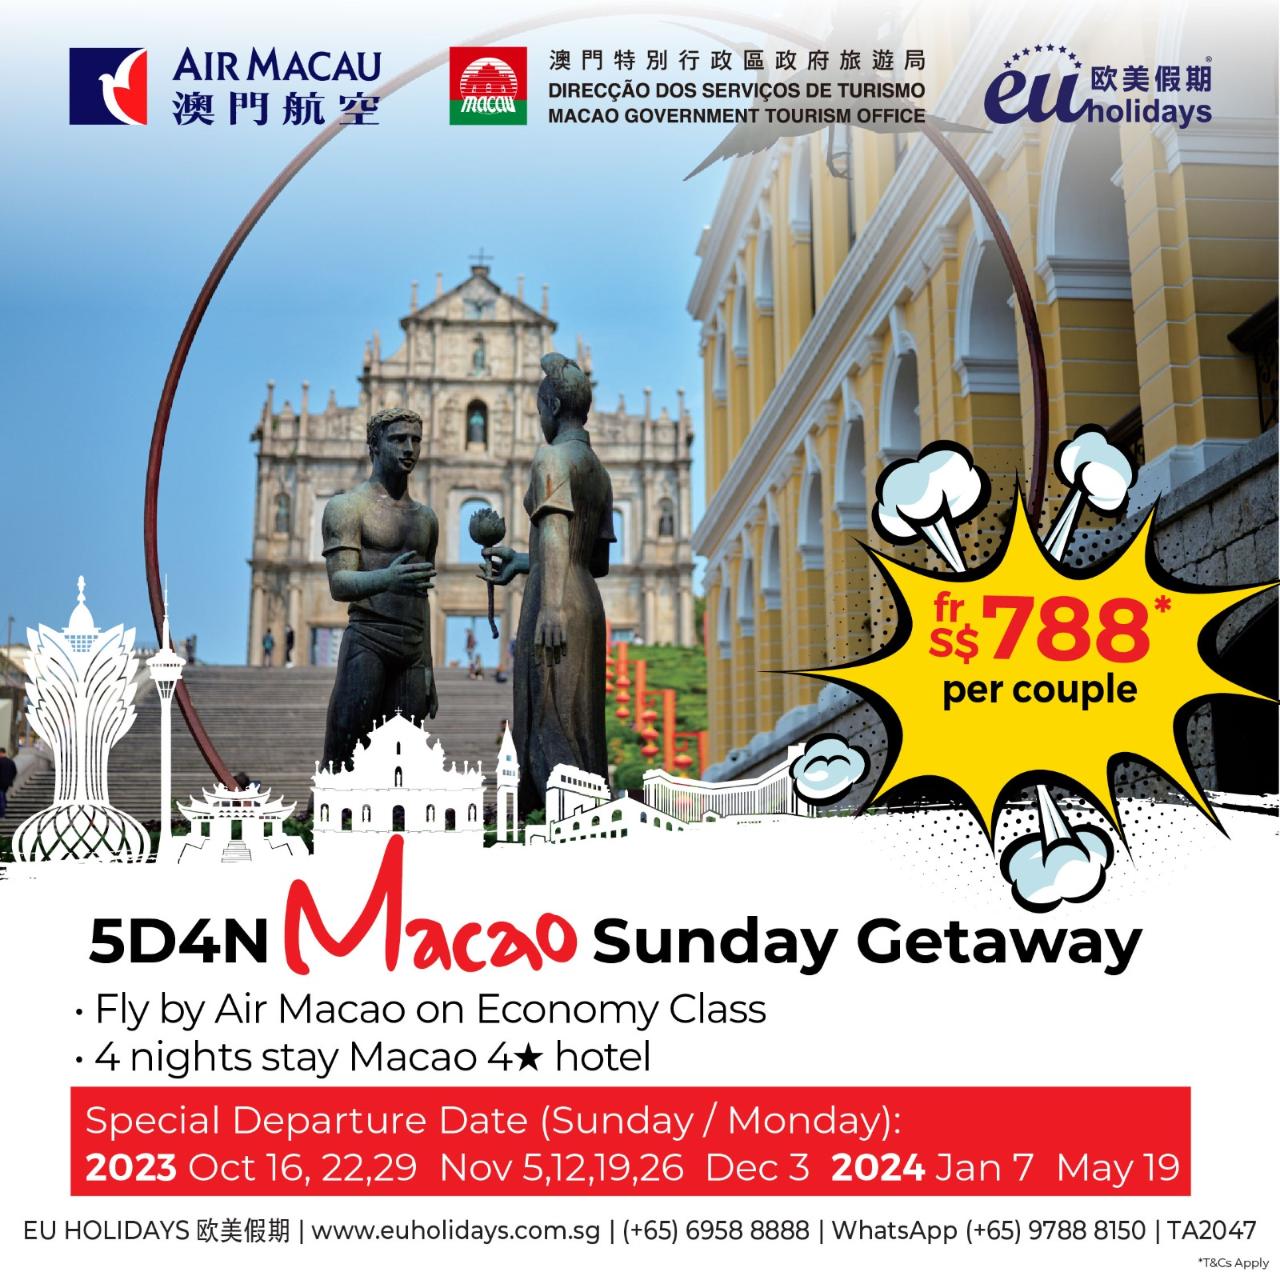 5D4N Macao Sunday Getaway from $788 per couple - Special Departure date only